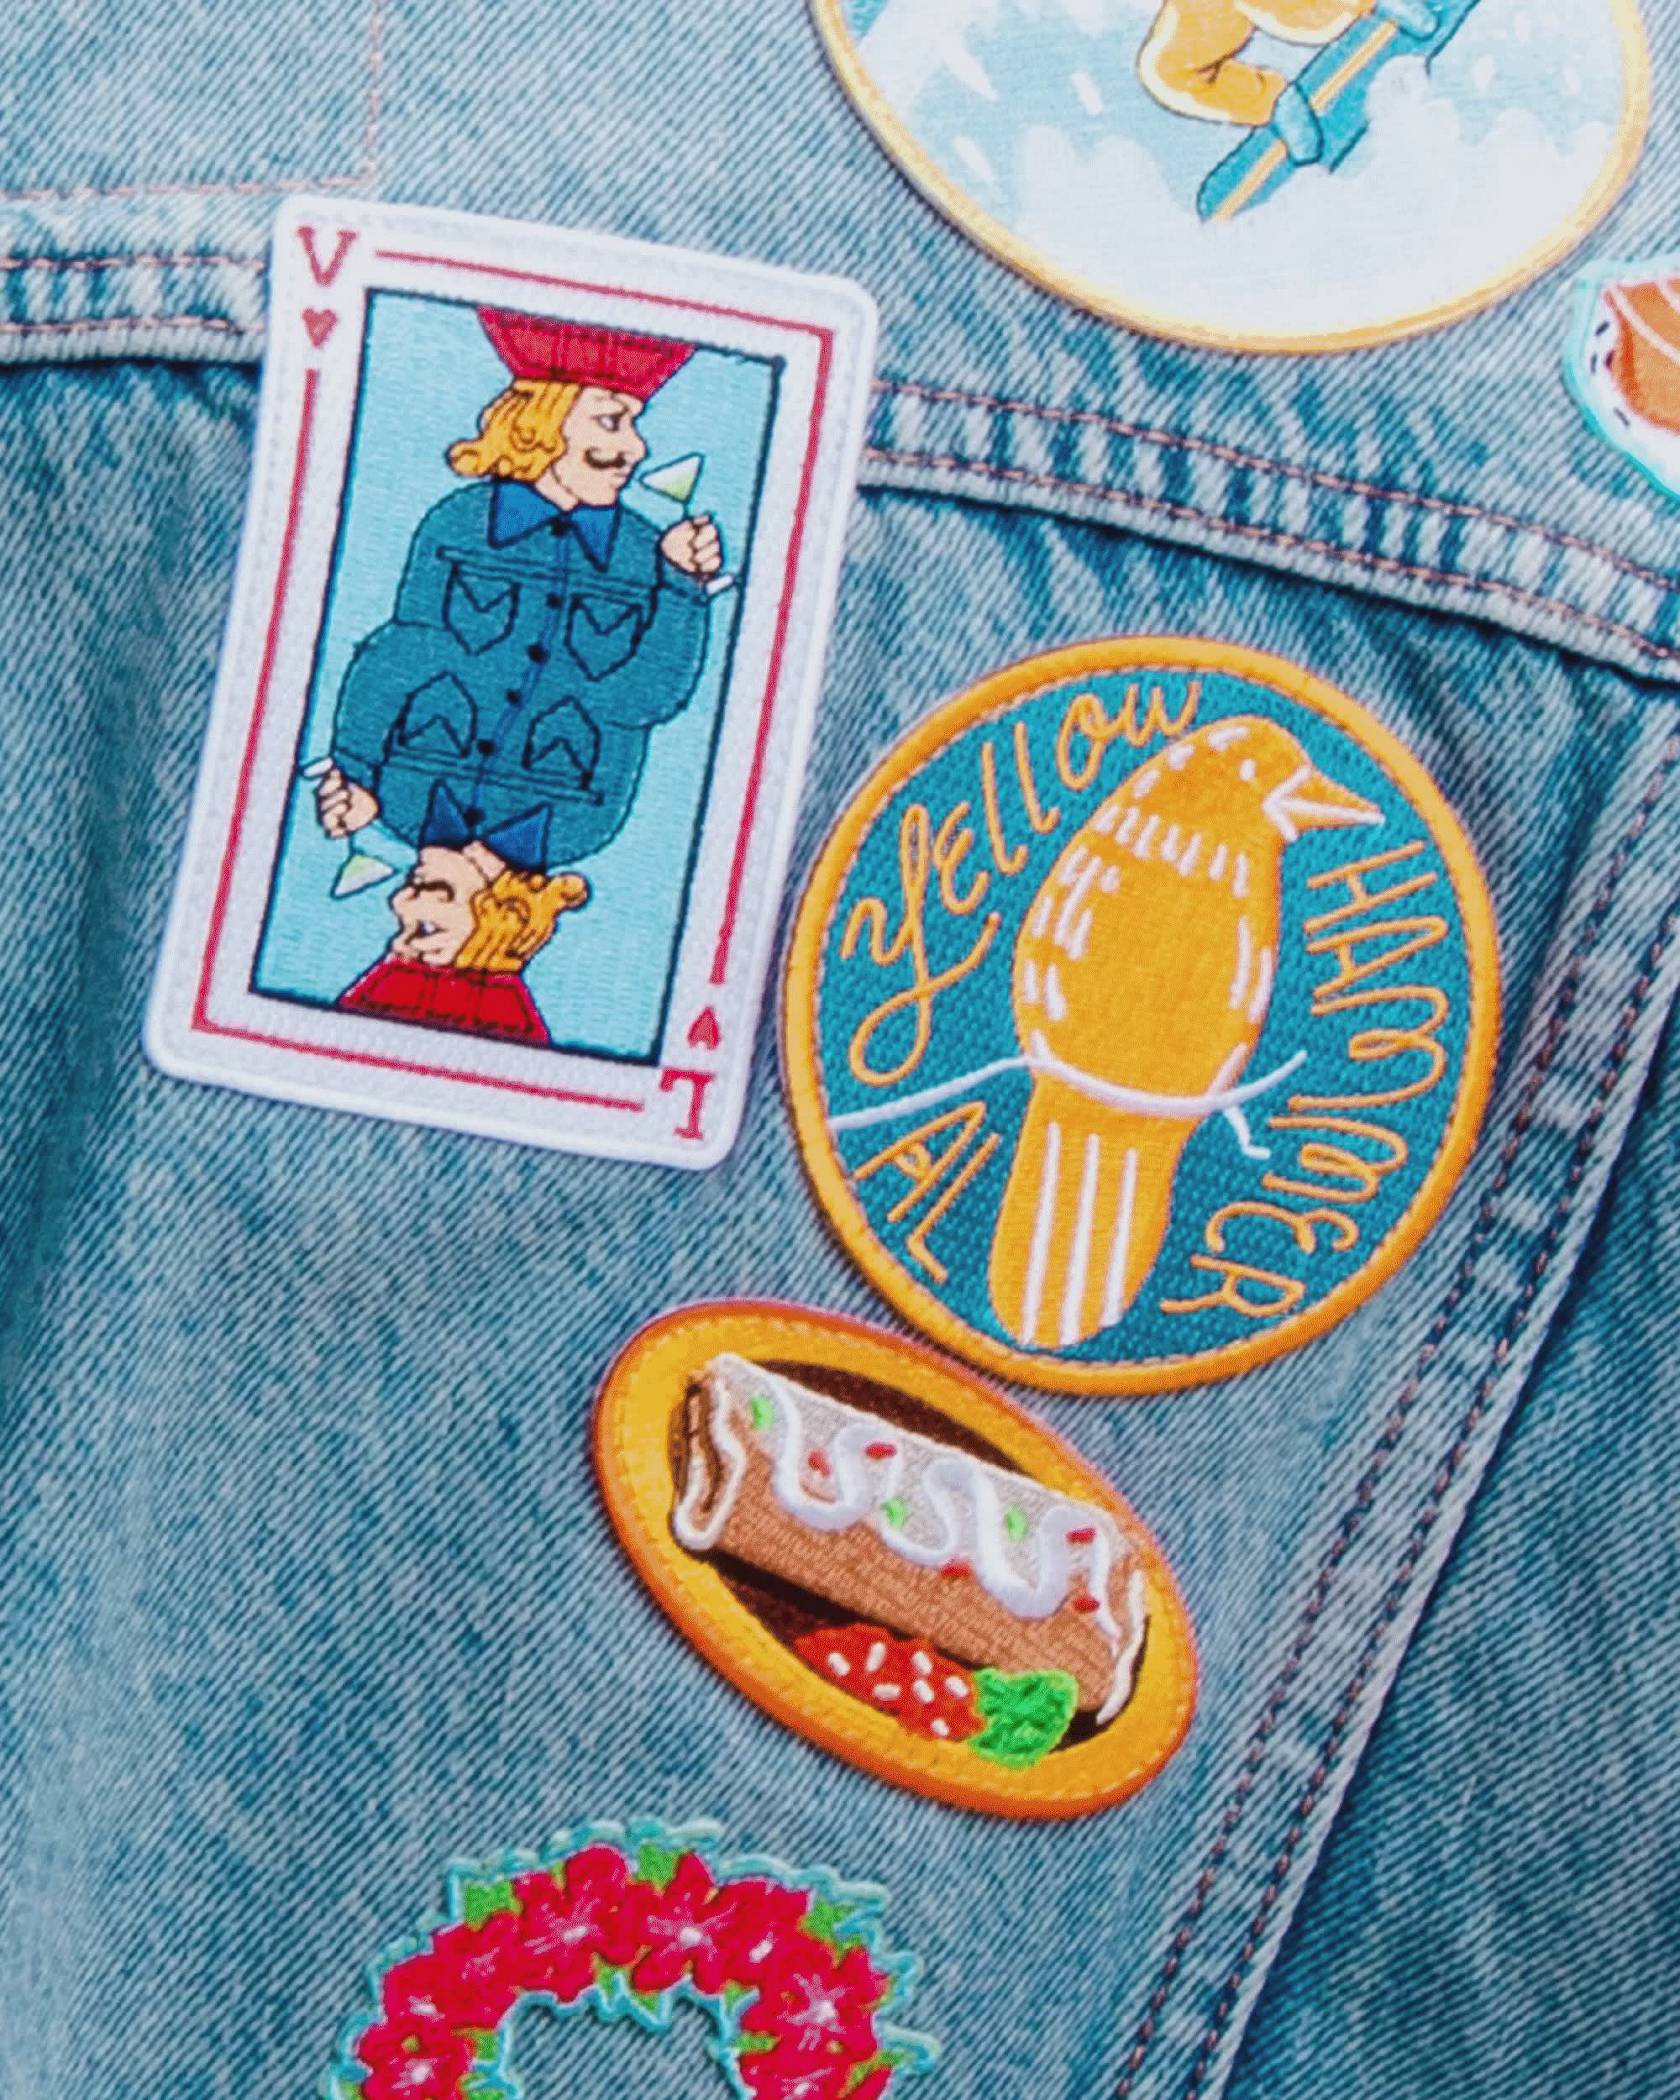 Image of Levi's patches.